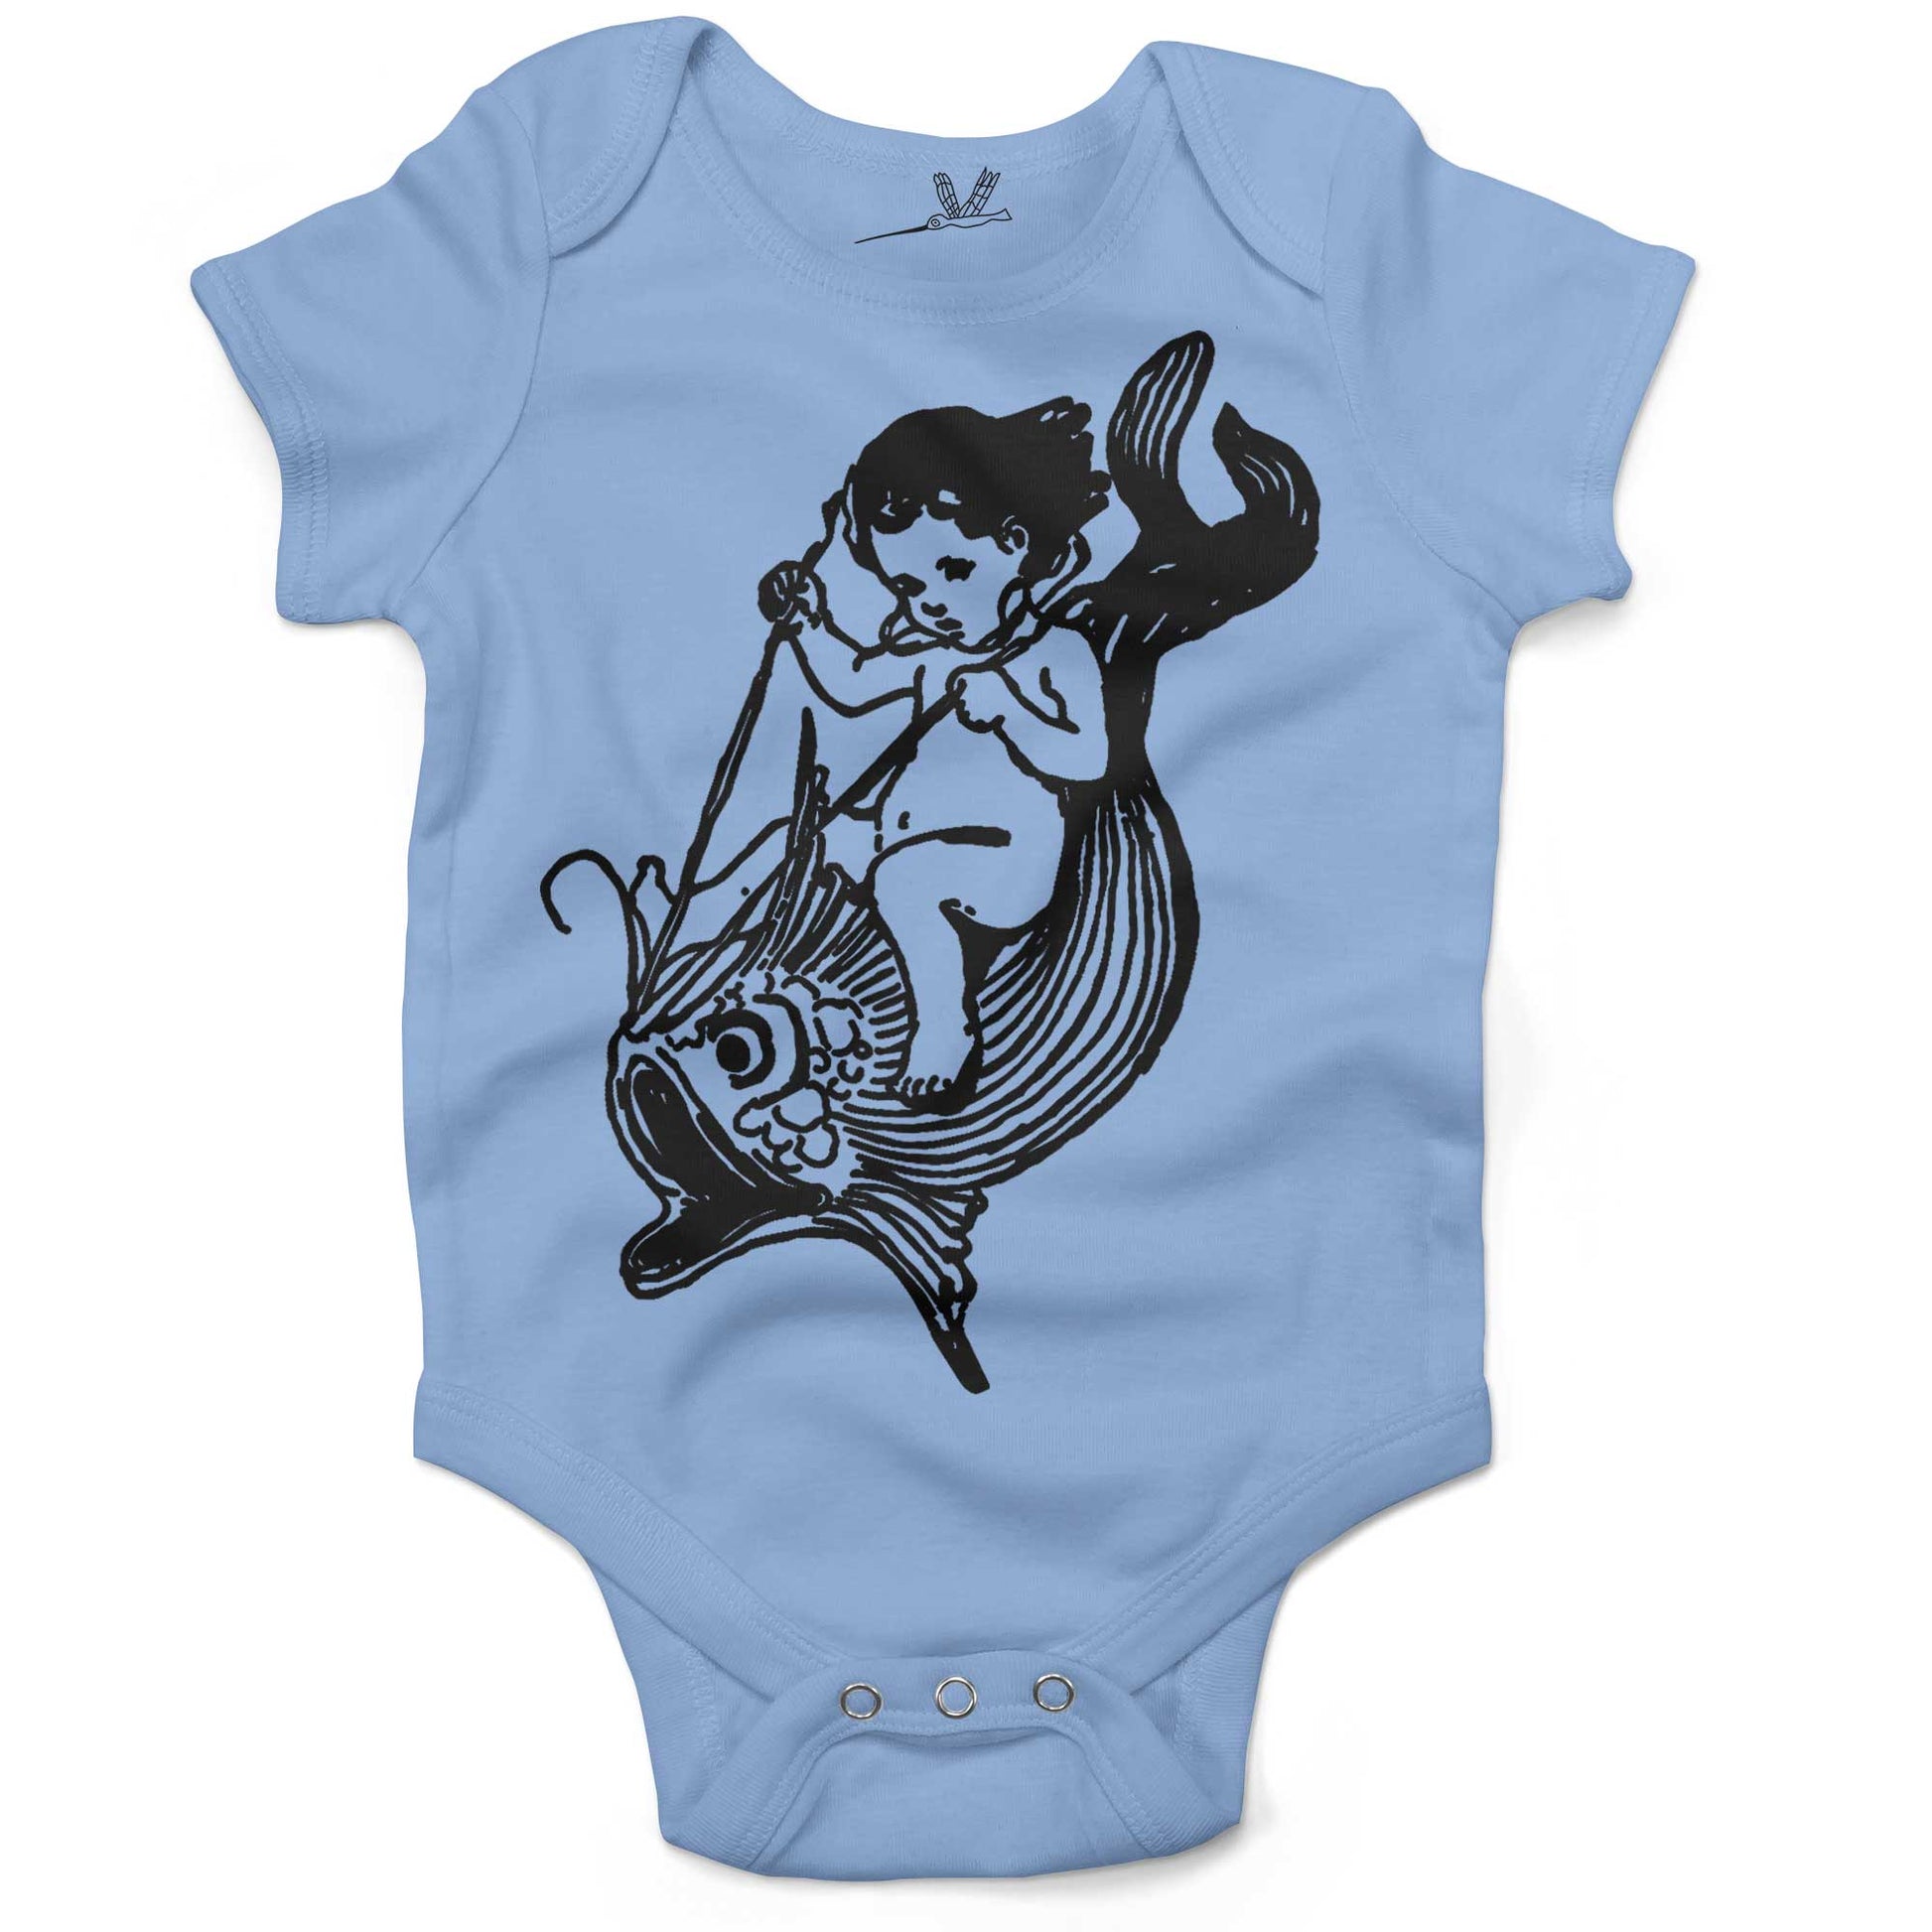 Water Baby Riding A Giant Fish Infant Bodysuit or Raglan Tee-Organic Baby Blue-3-6 months